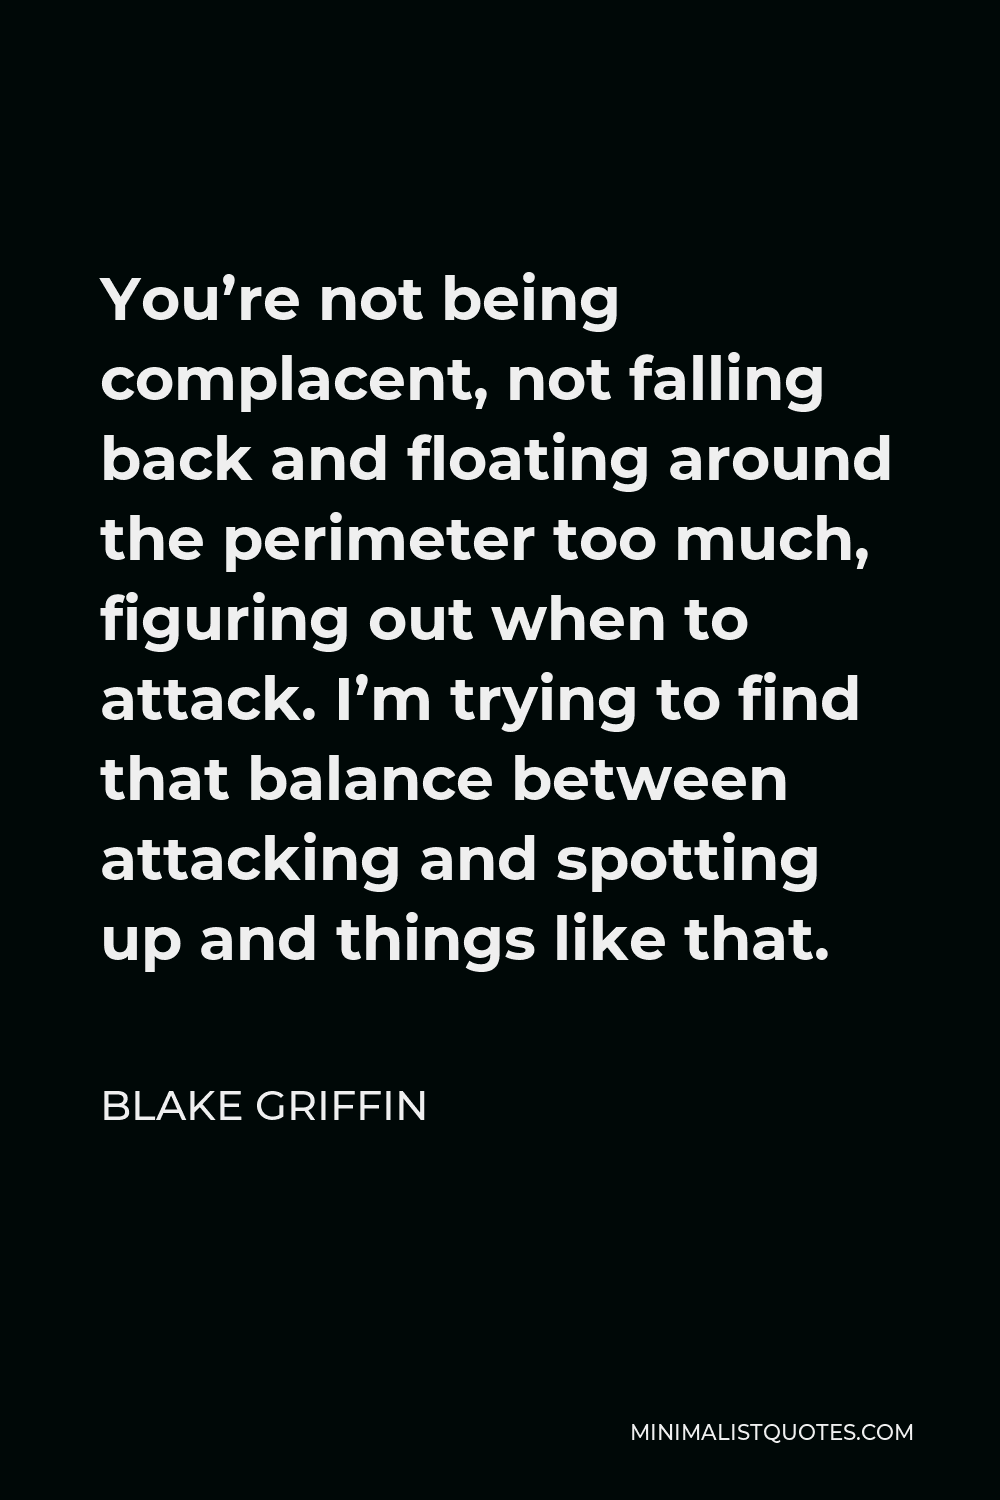 Blake Griffin Quote - You’re not being complacent, not falling back and floating around the perimeter too much, figuring out when to attack. I’m trying to find that balance between attacking and spotting up and things like that.